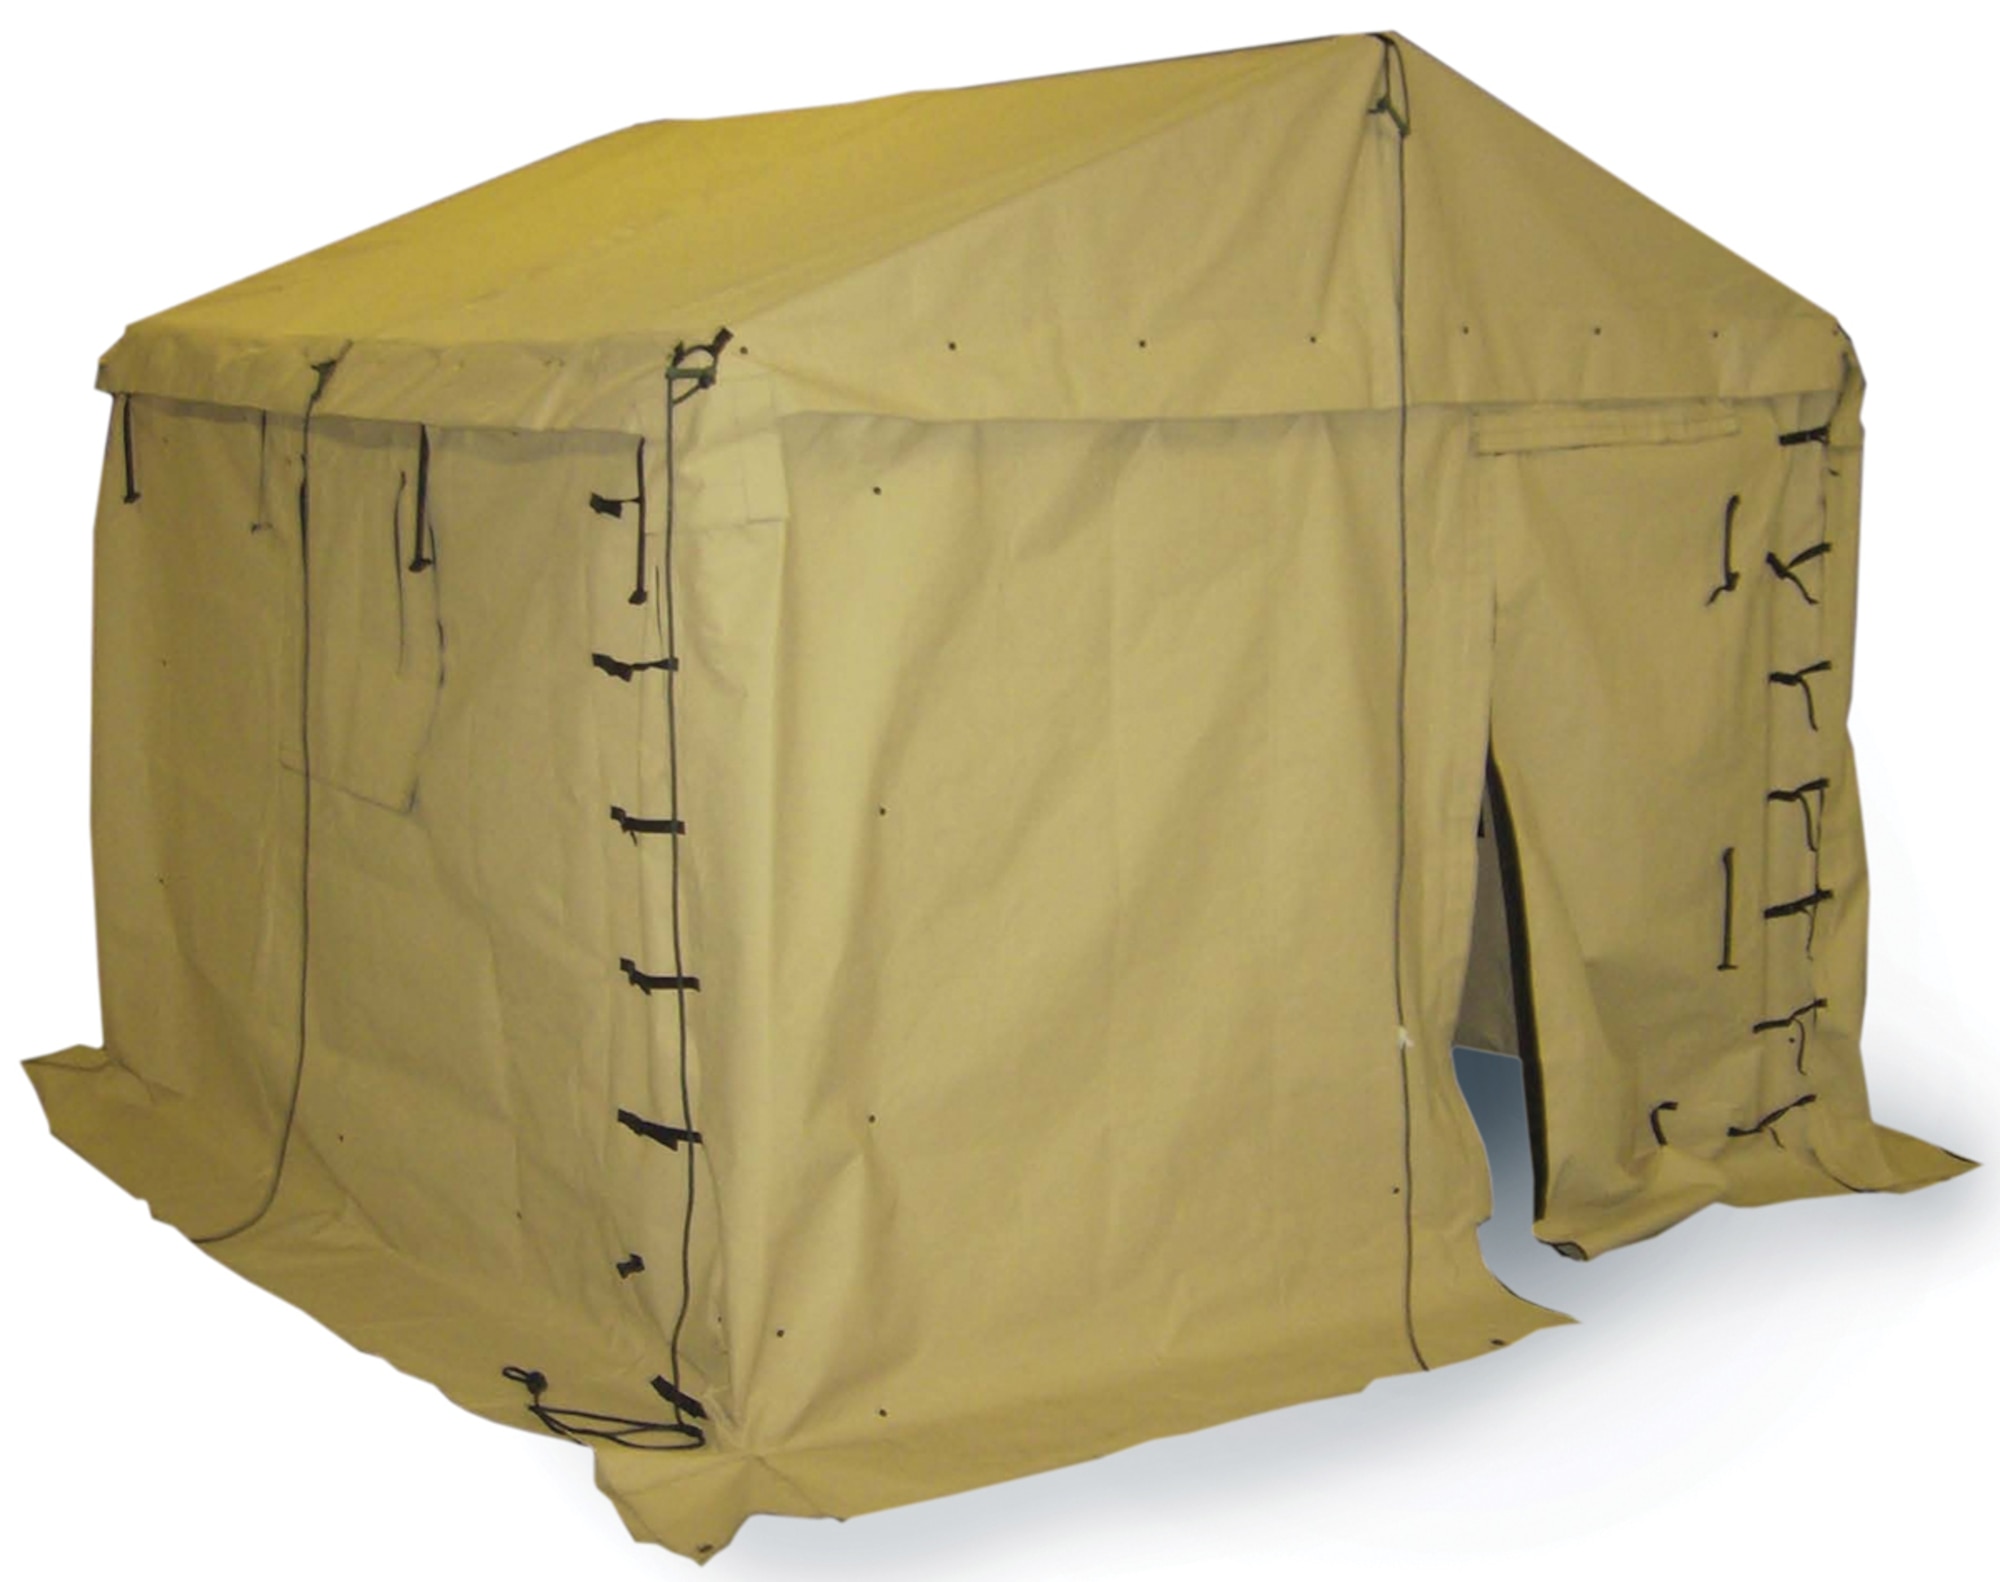 Lab Shares a Stake in Better Military Tents > Wright-Patterson AFB